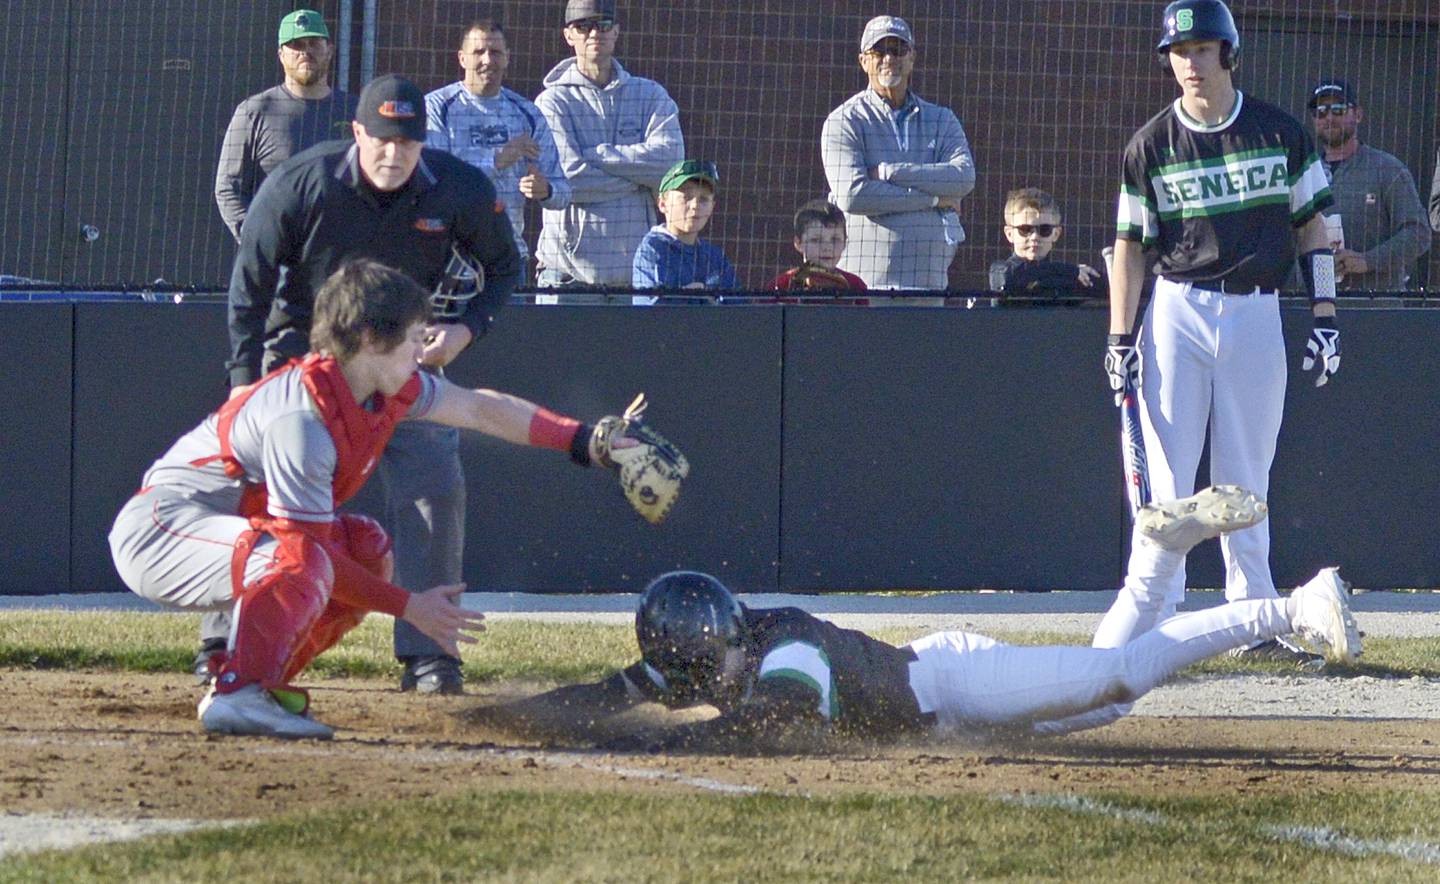 Seneca’s Casey Clennon slides in under the tag of Ottawa’s Adan Swanson to score the first run in the 3rd inning Monday at Seneca.